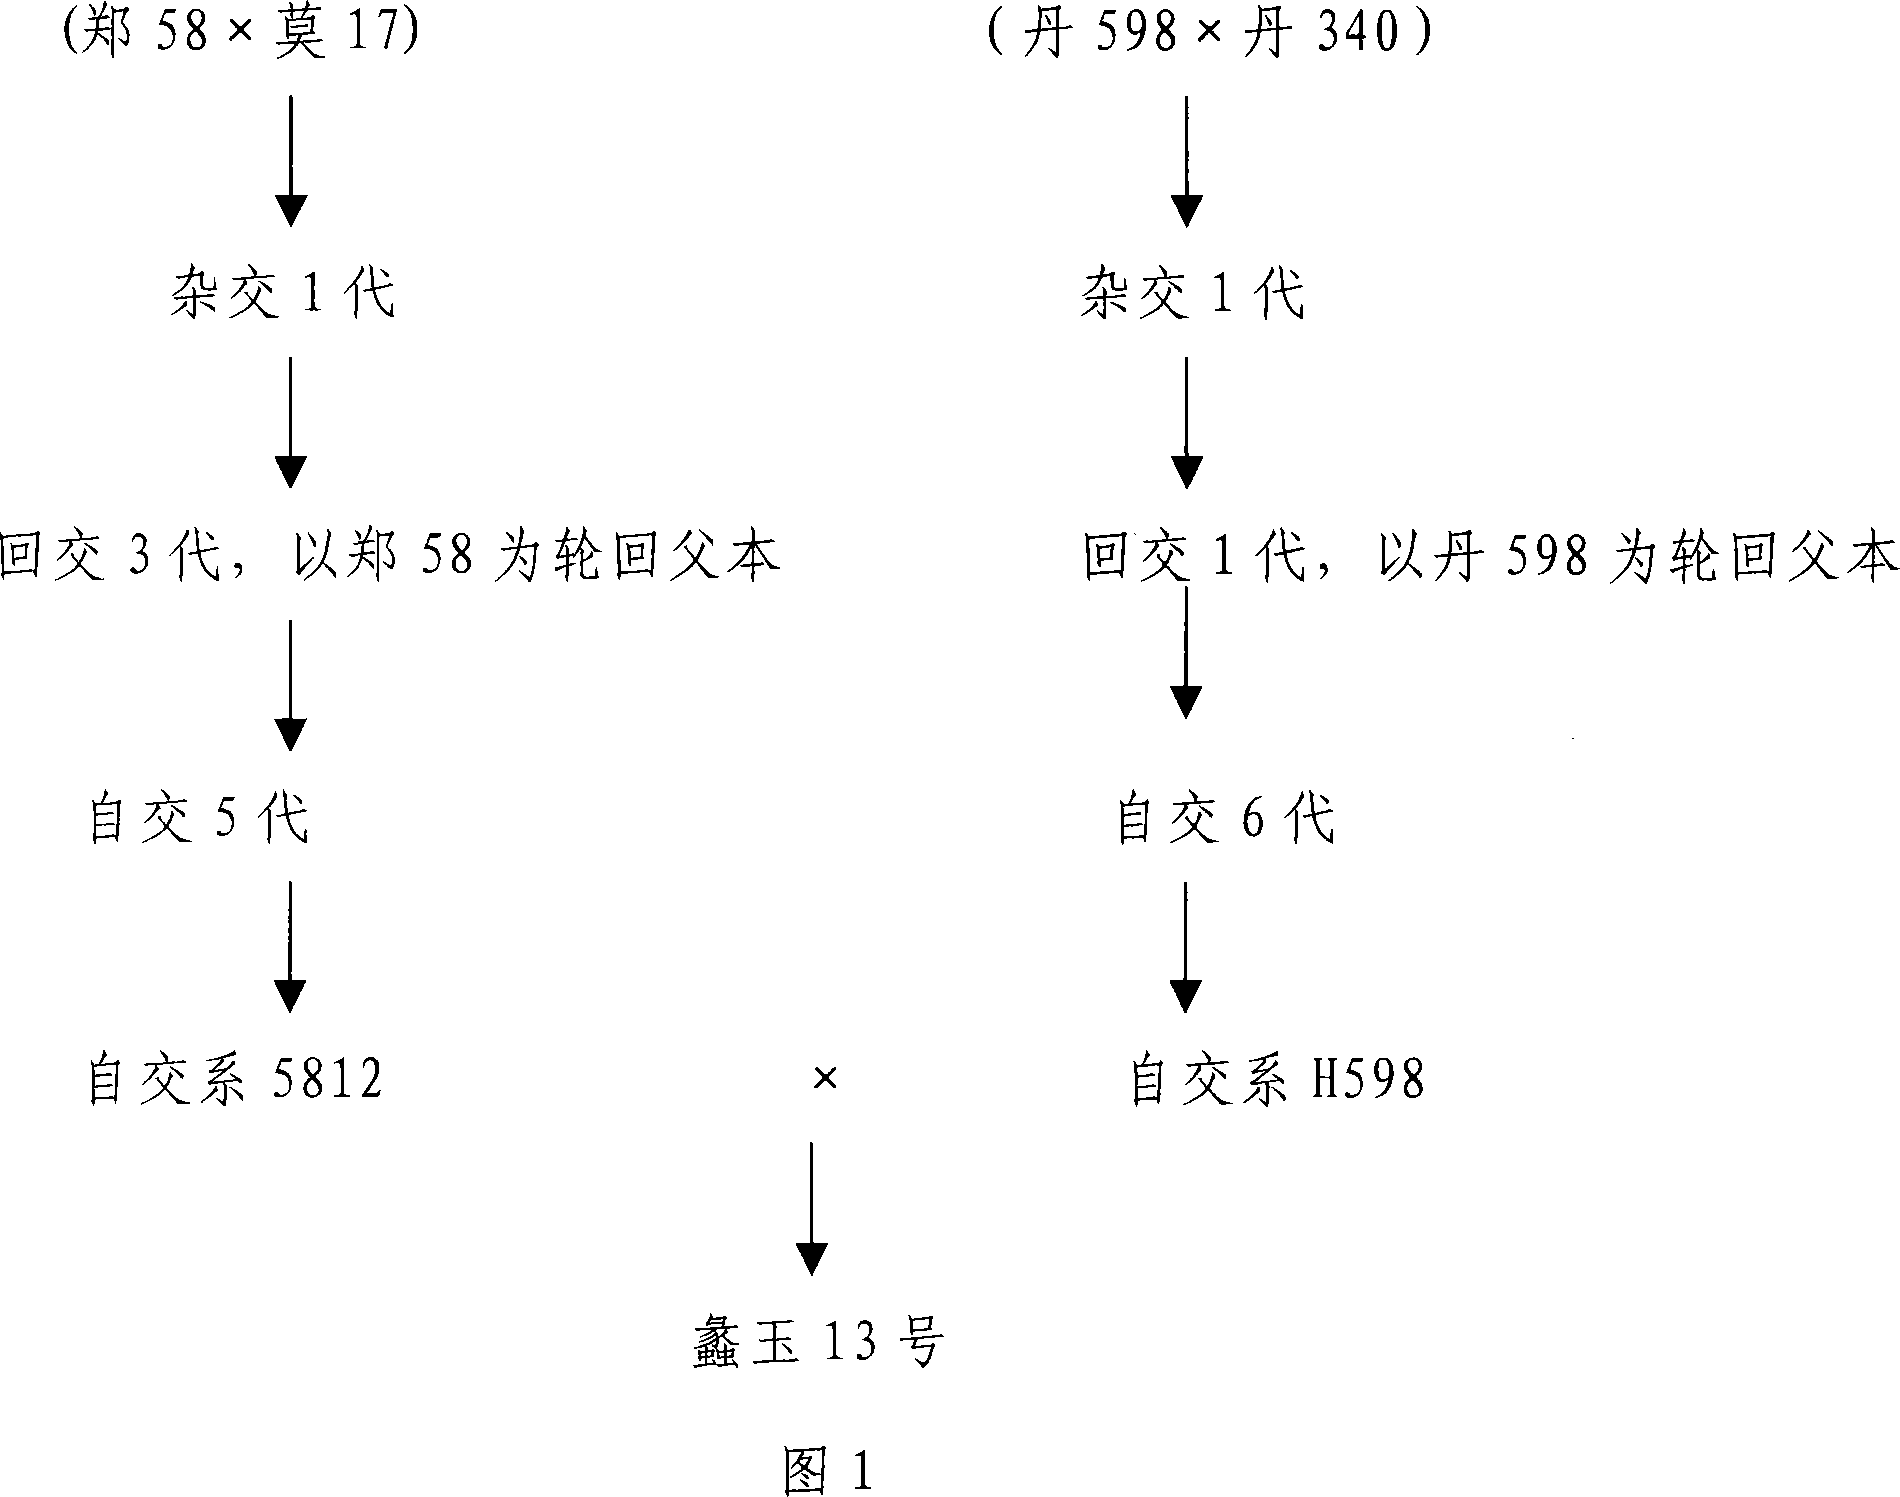 Method for seeds producing crossbreed of corn in 'Liyu' number 13